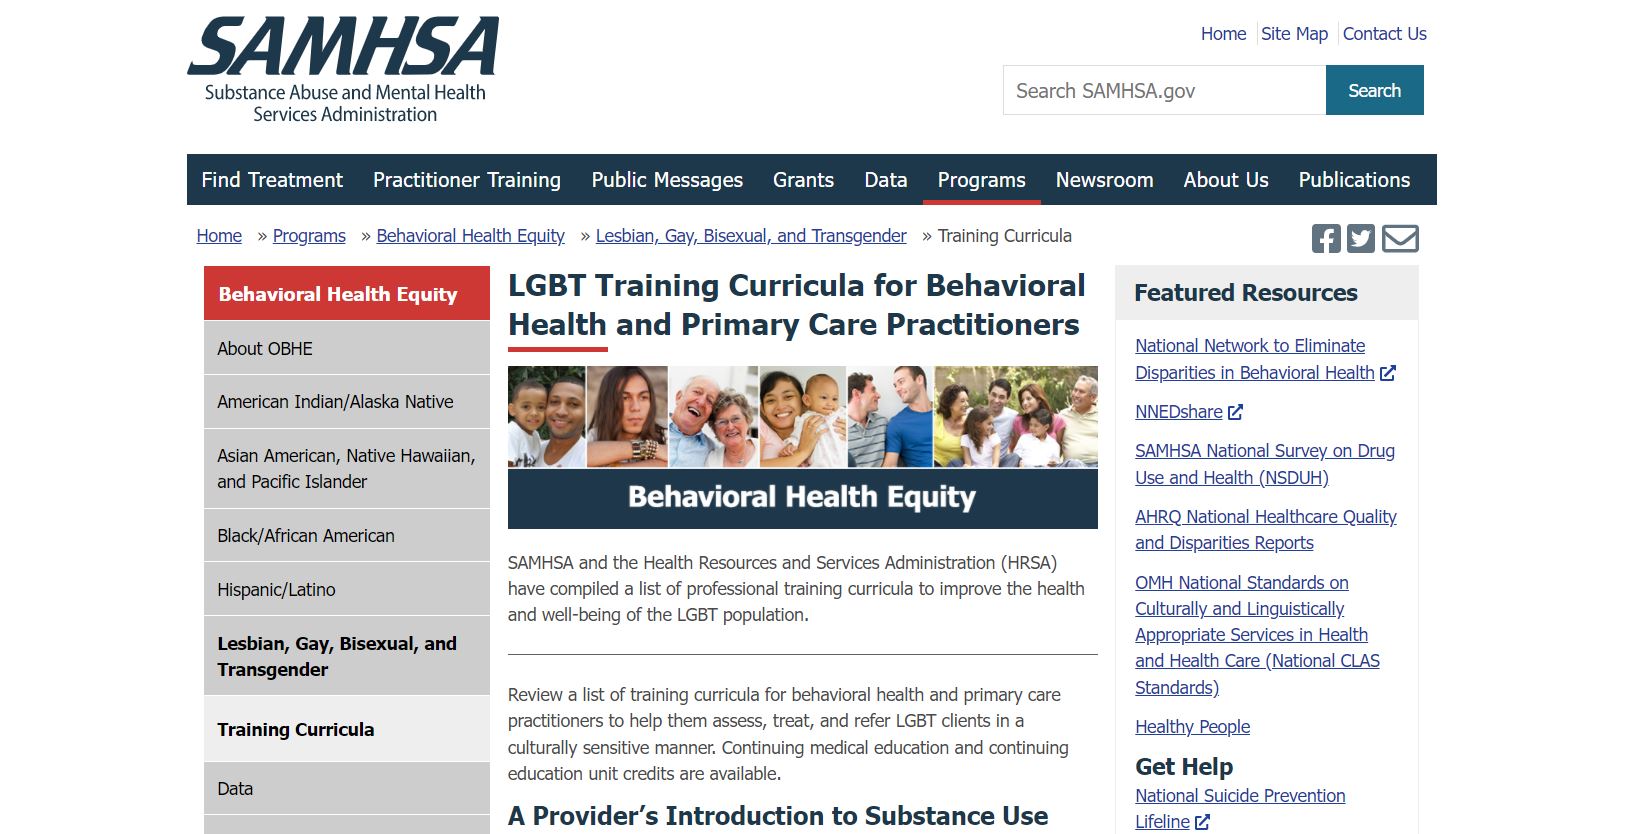 SAMHSA: LGBT Training Curricula for Behavioral Health and Primary Care Practitioners